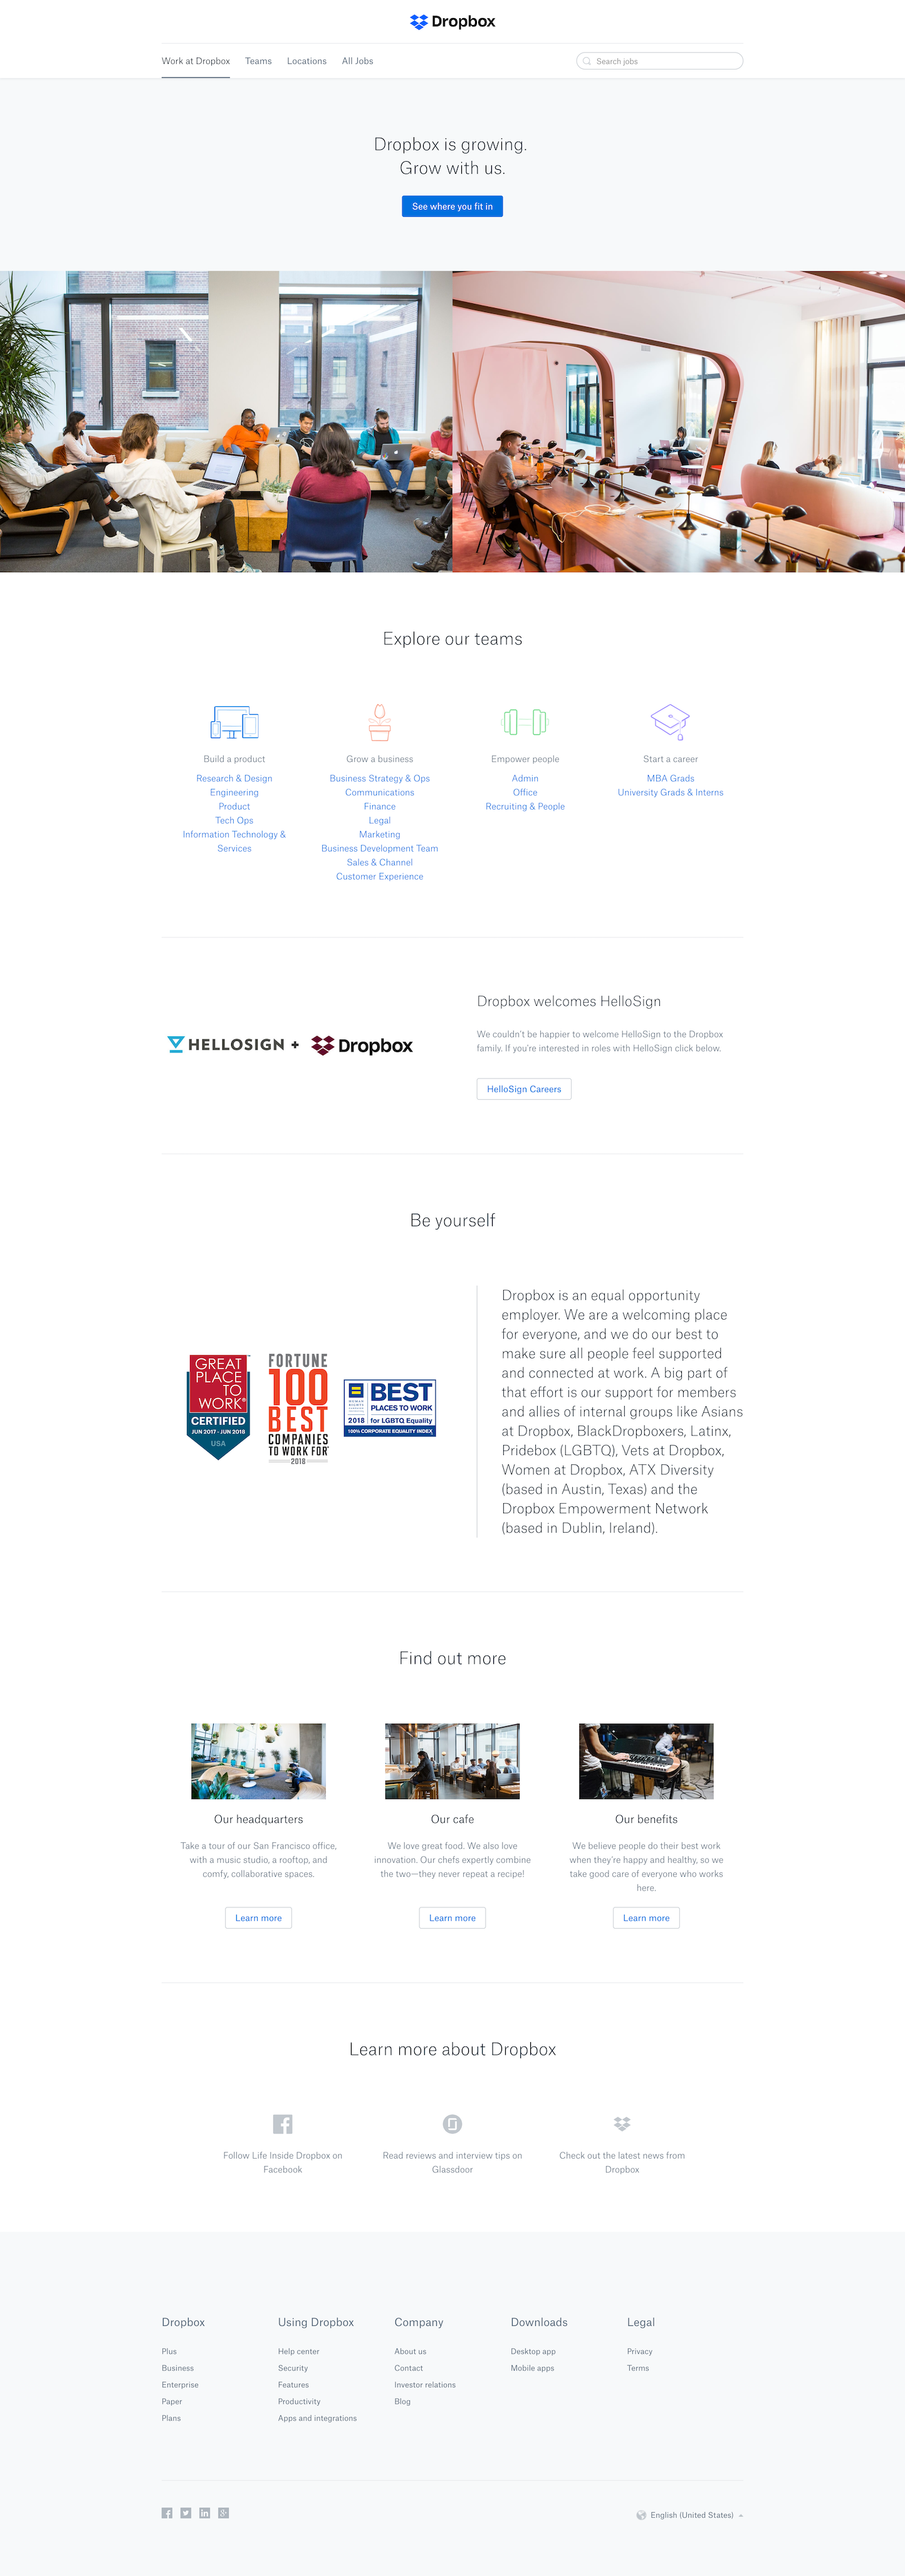 Screenshot of the Jobs page from the Dropbox website.